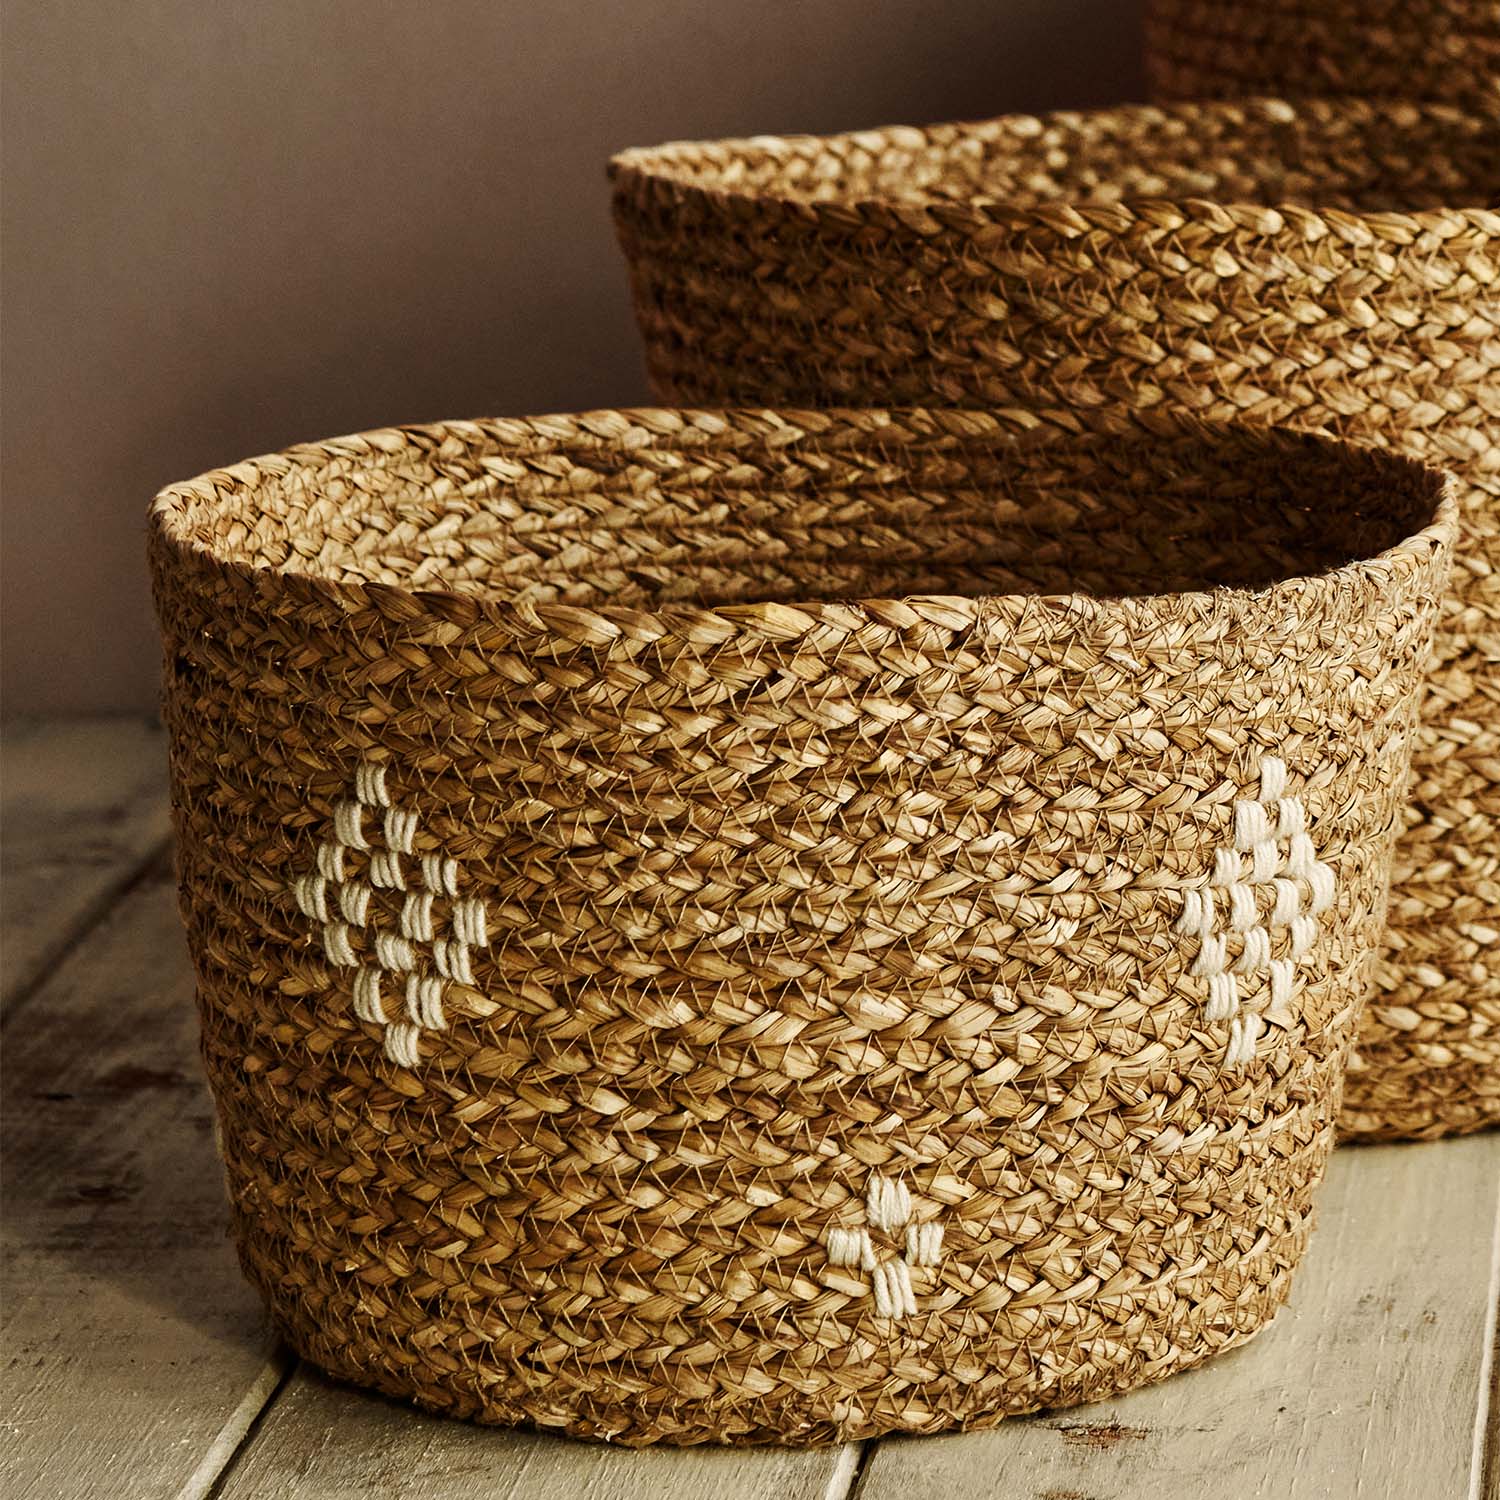 A small handmade basket made of jute and cotton, on a wooden floor, with a larger one behind